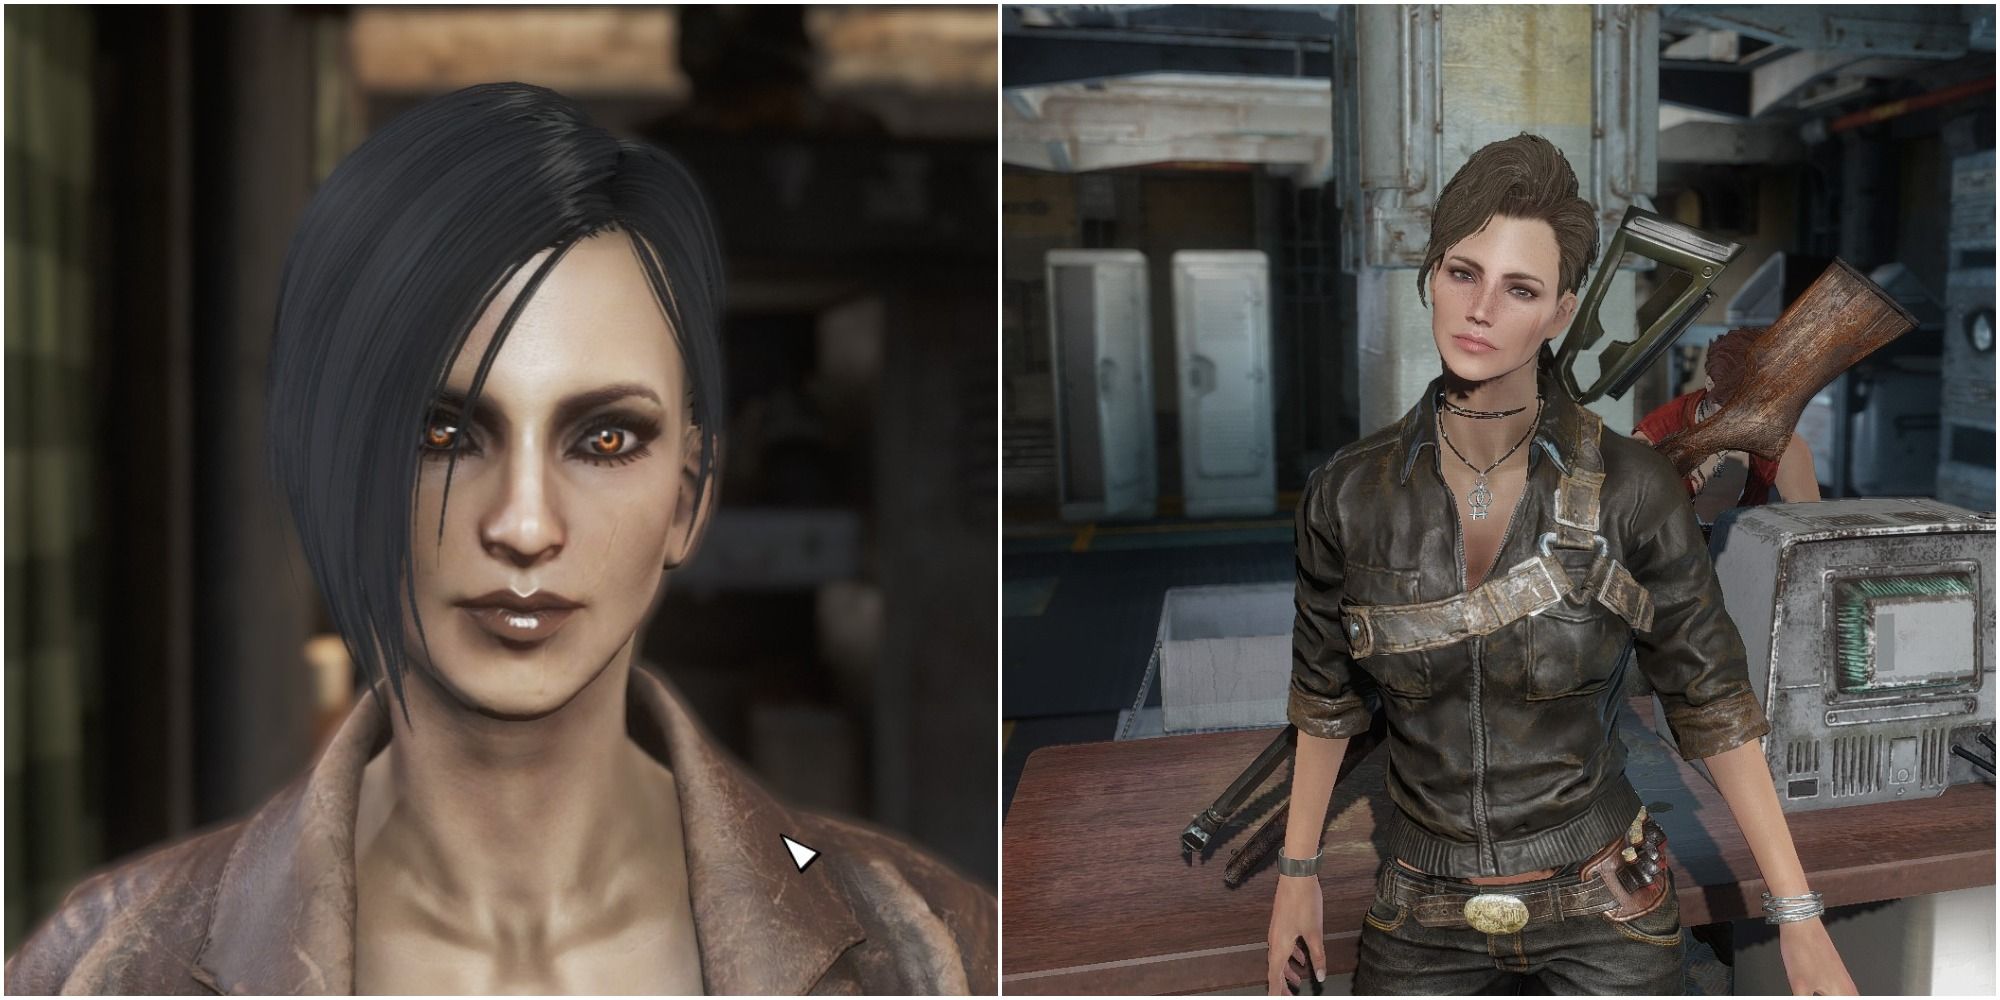 brenda ammons recommends Fallout 4 Spouse Mod